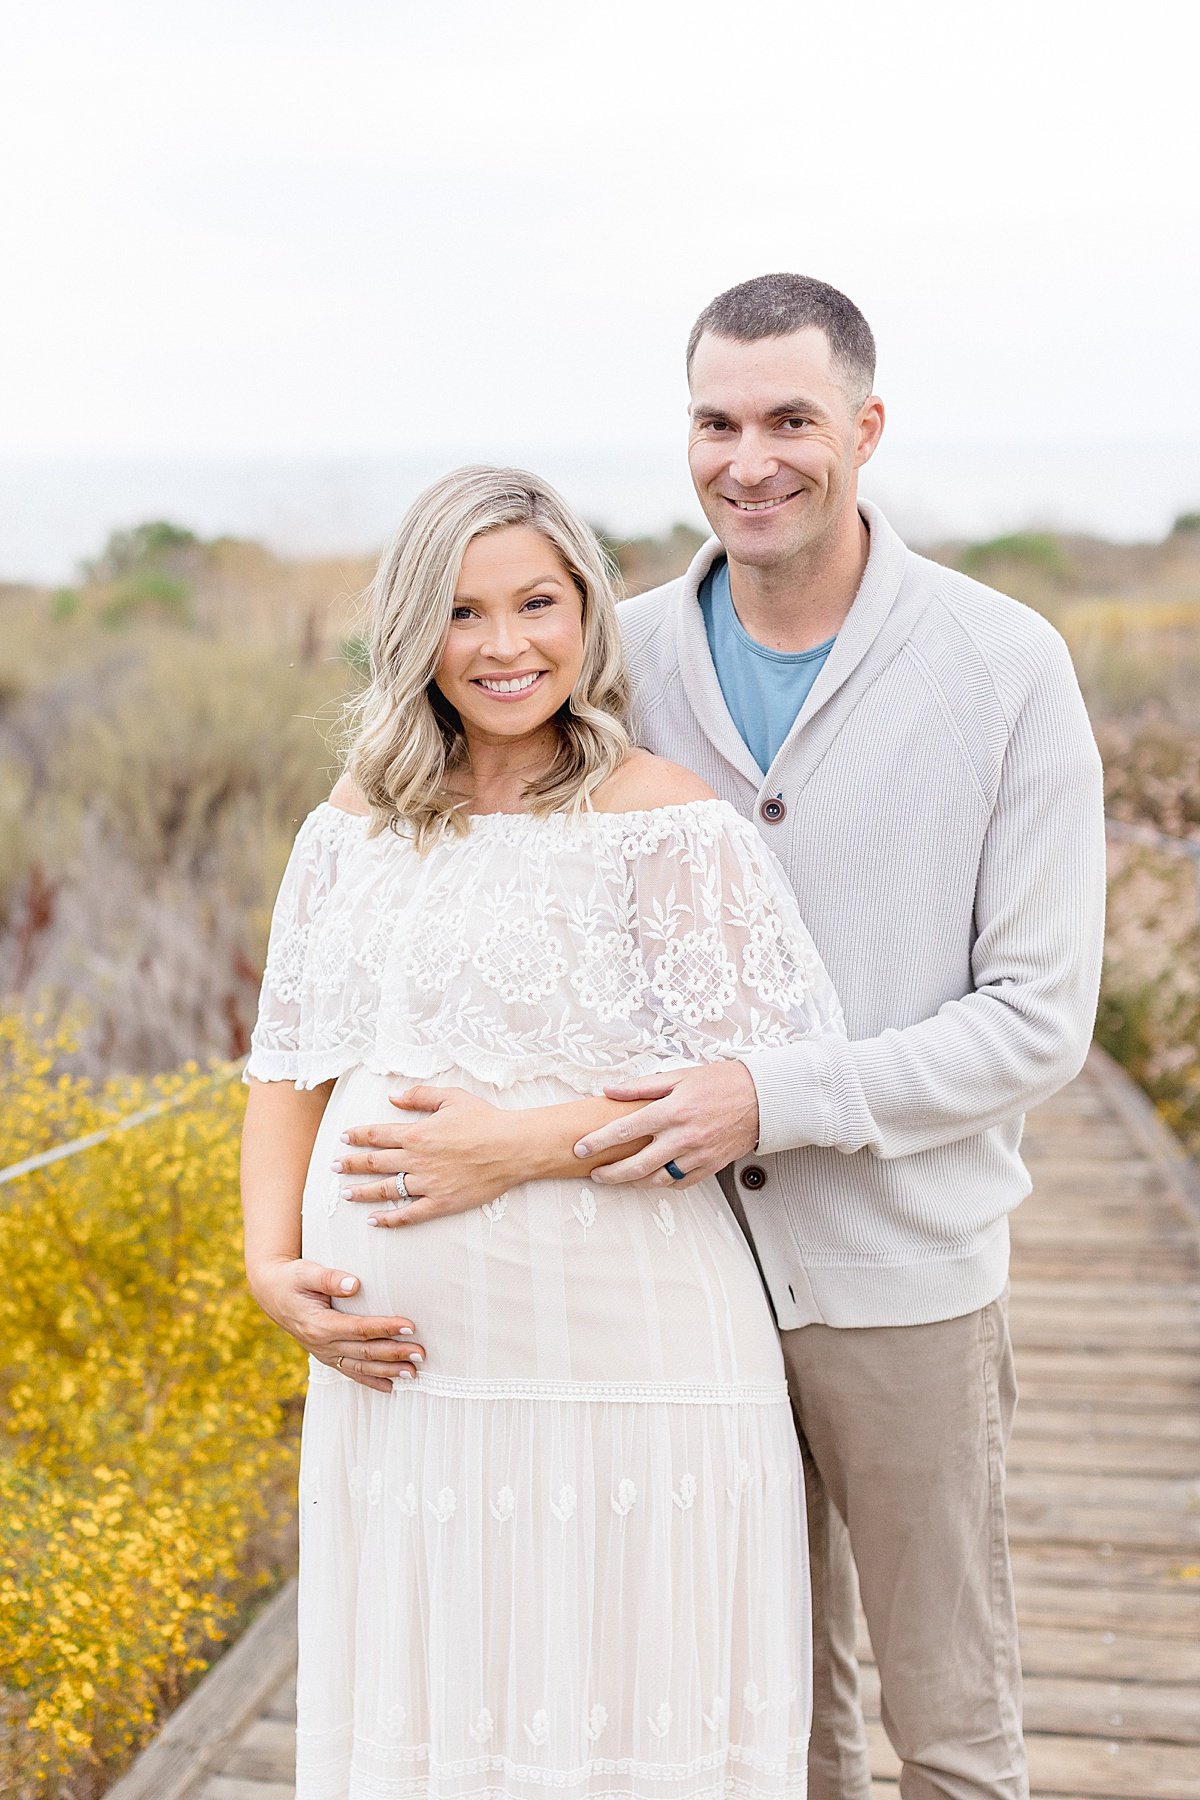 Excited Parents awaiting their first child during maternity session with Ambre Williams Photography